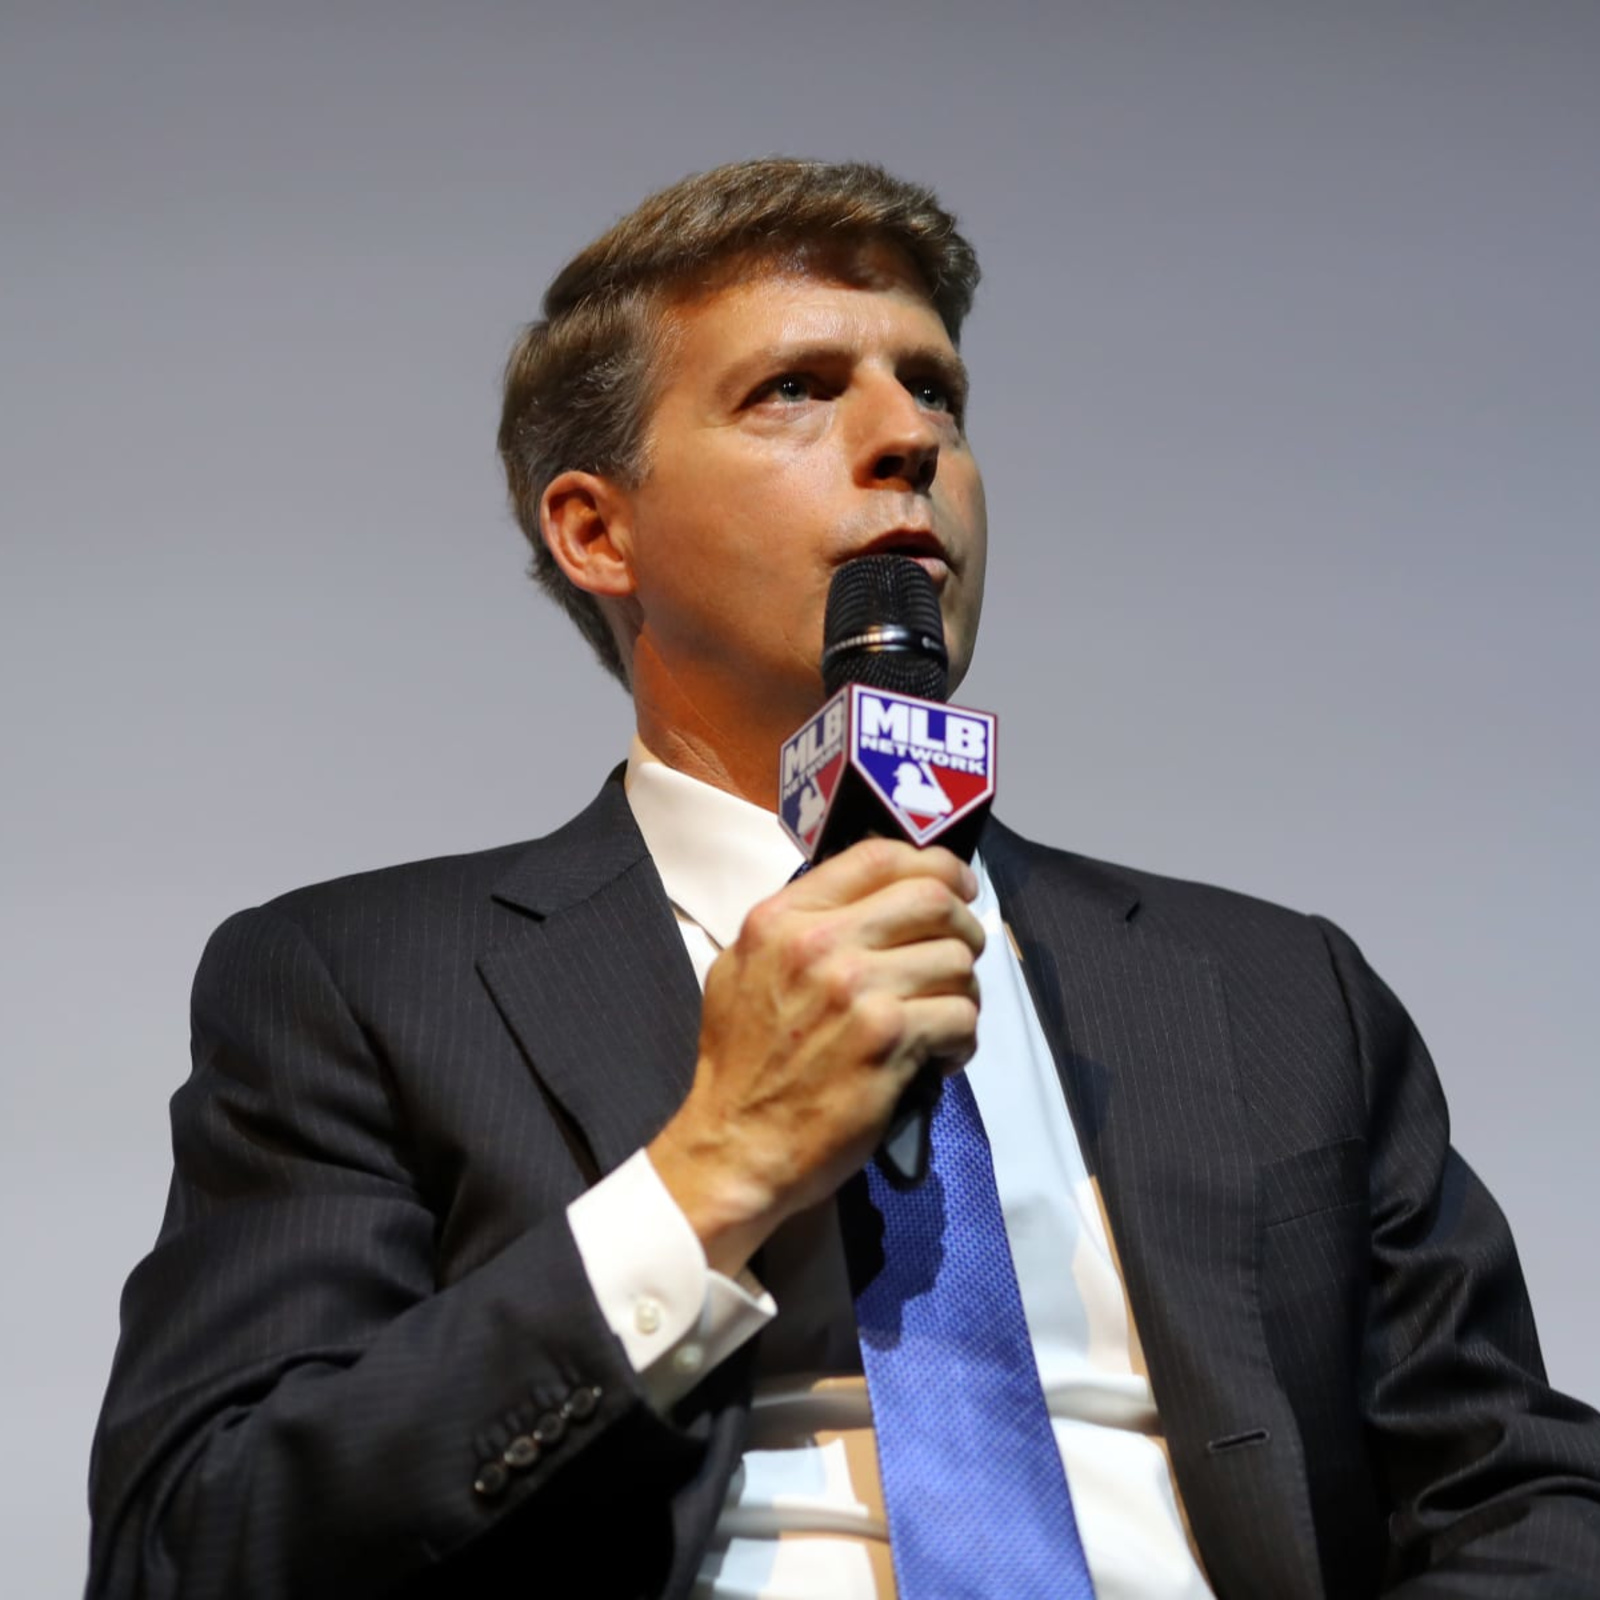 Yankees fans boo Hal Steinbrenner during Paul O'Neill ceremony